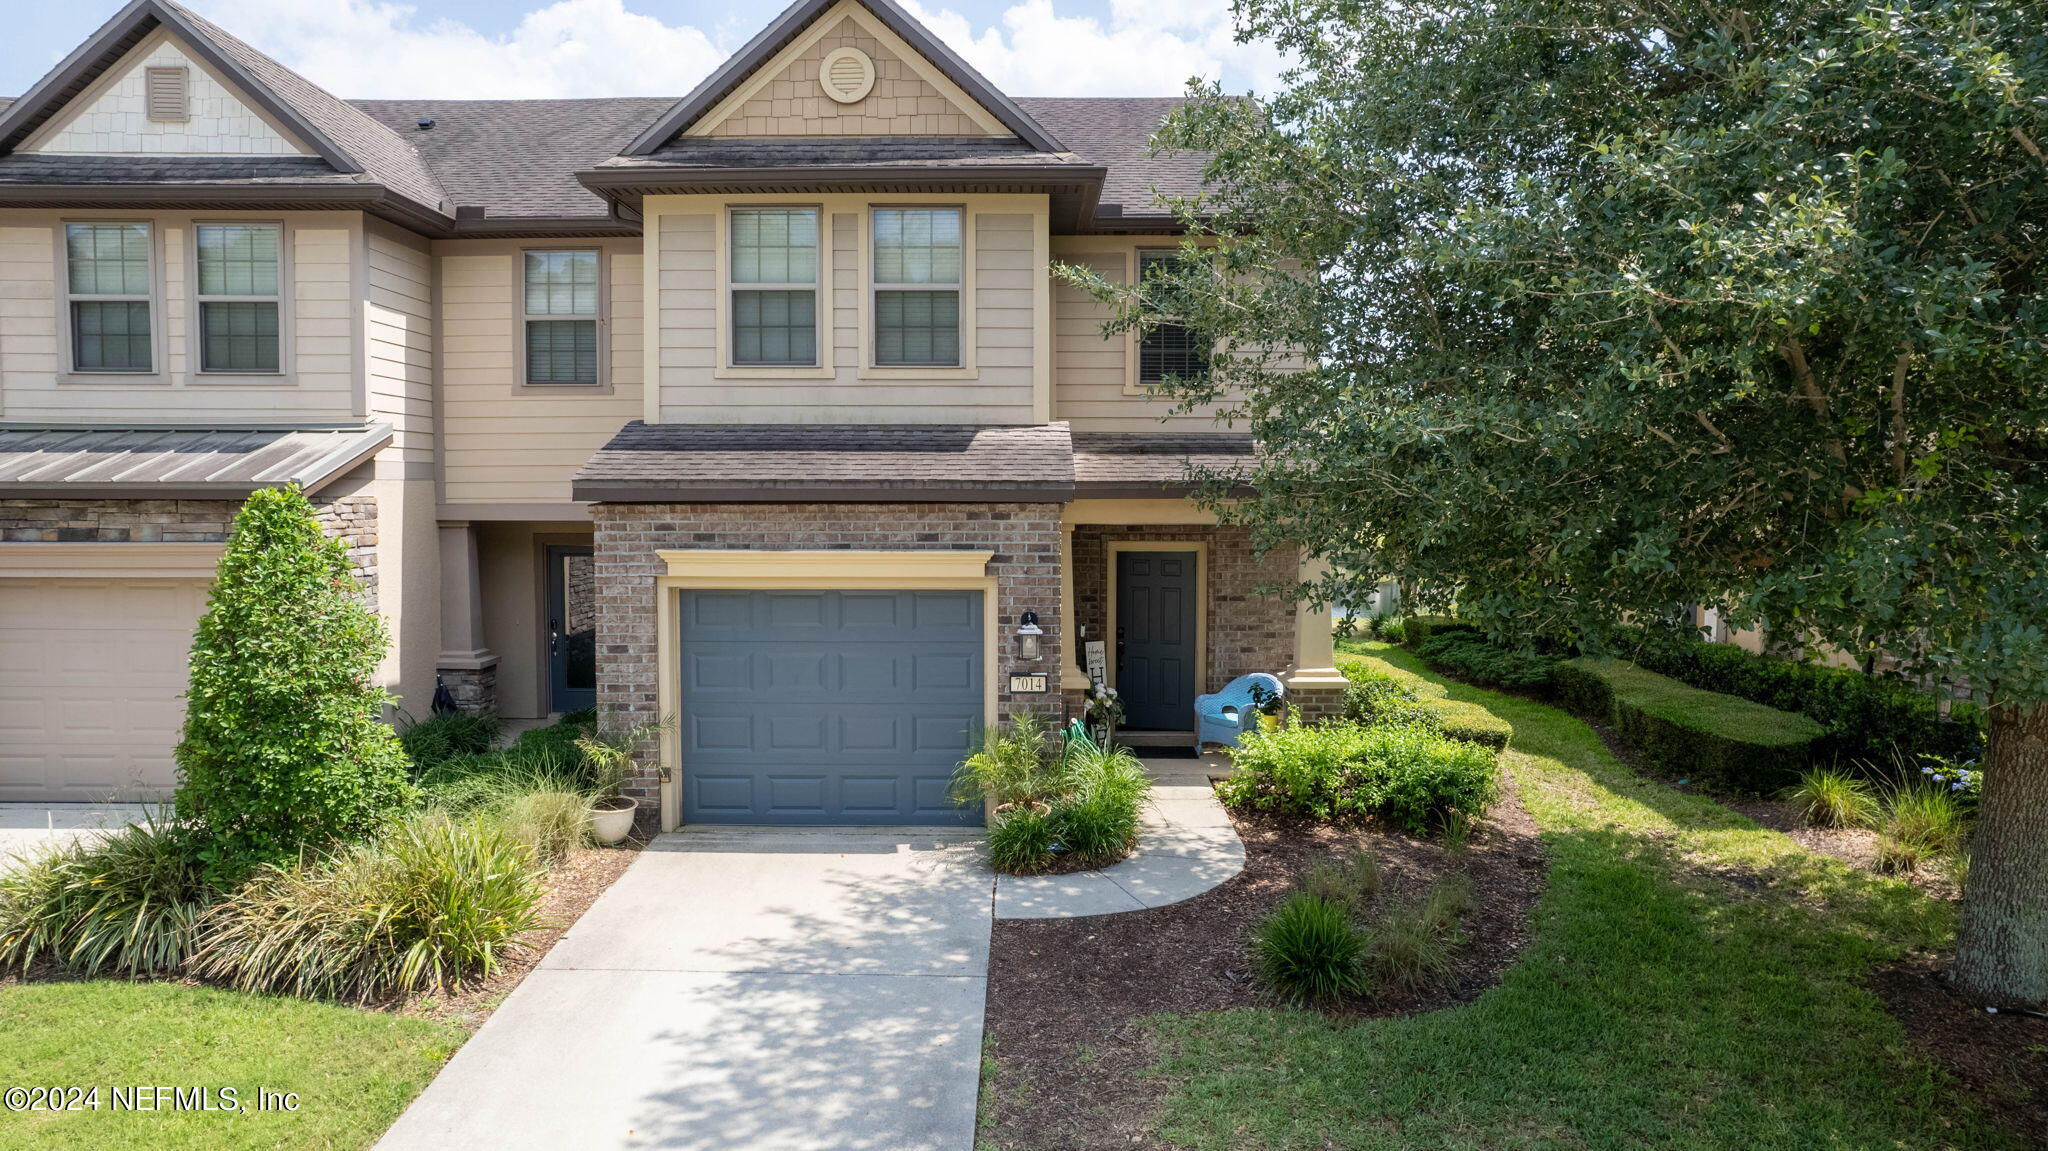 View Jacksonville, FL 32258 townhome